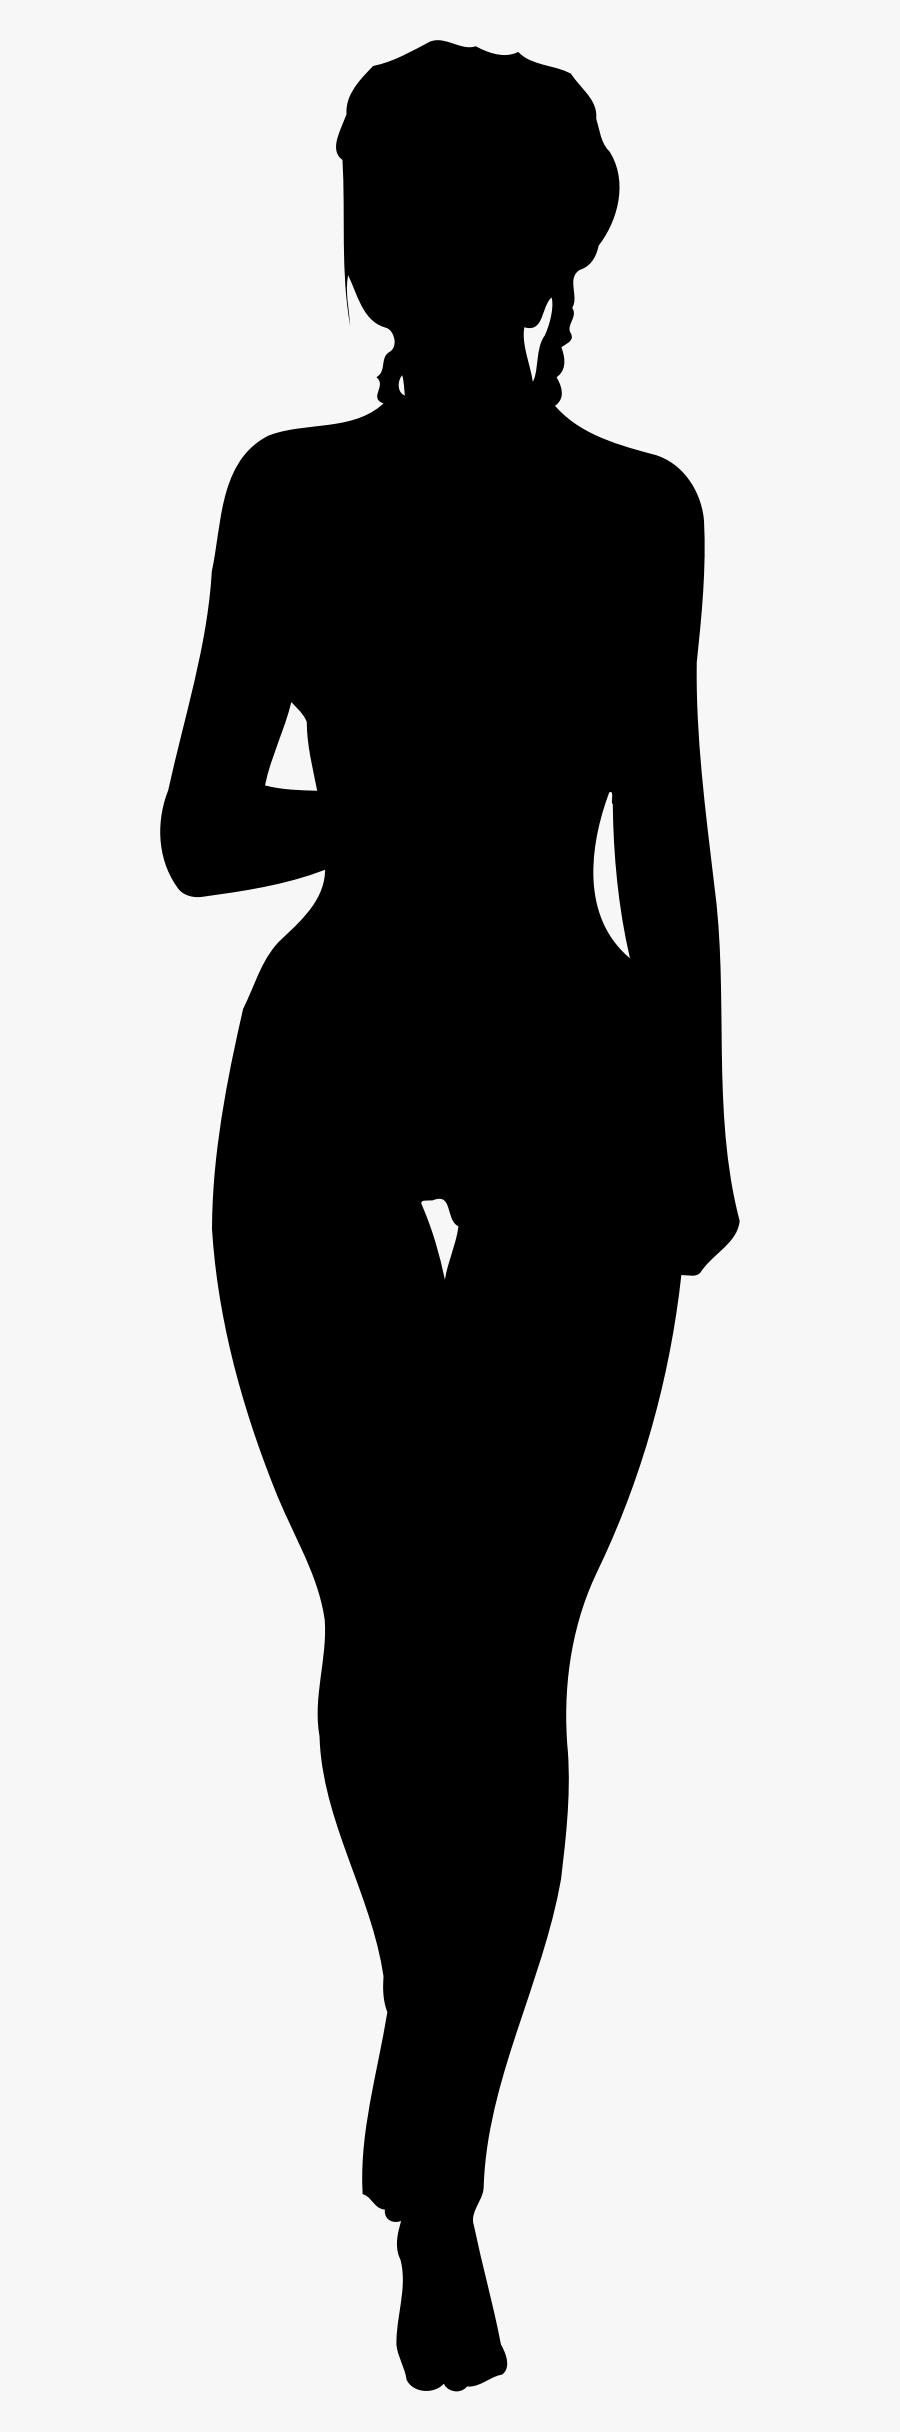 Woman Walking Clip Arts - Running Person Silhouette Png, Transparent Clipart